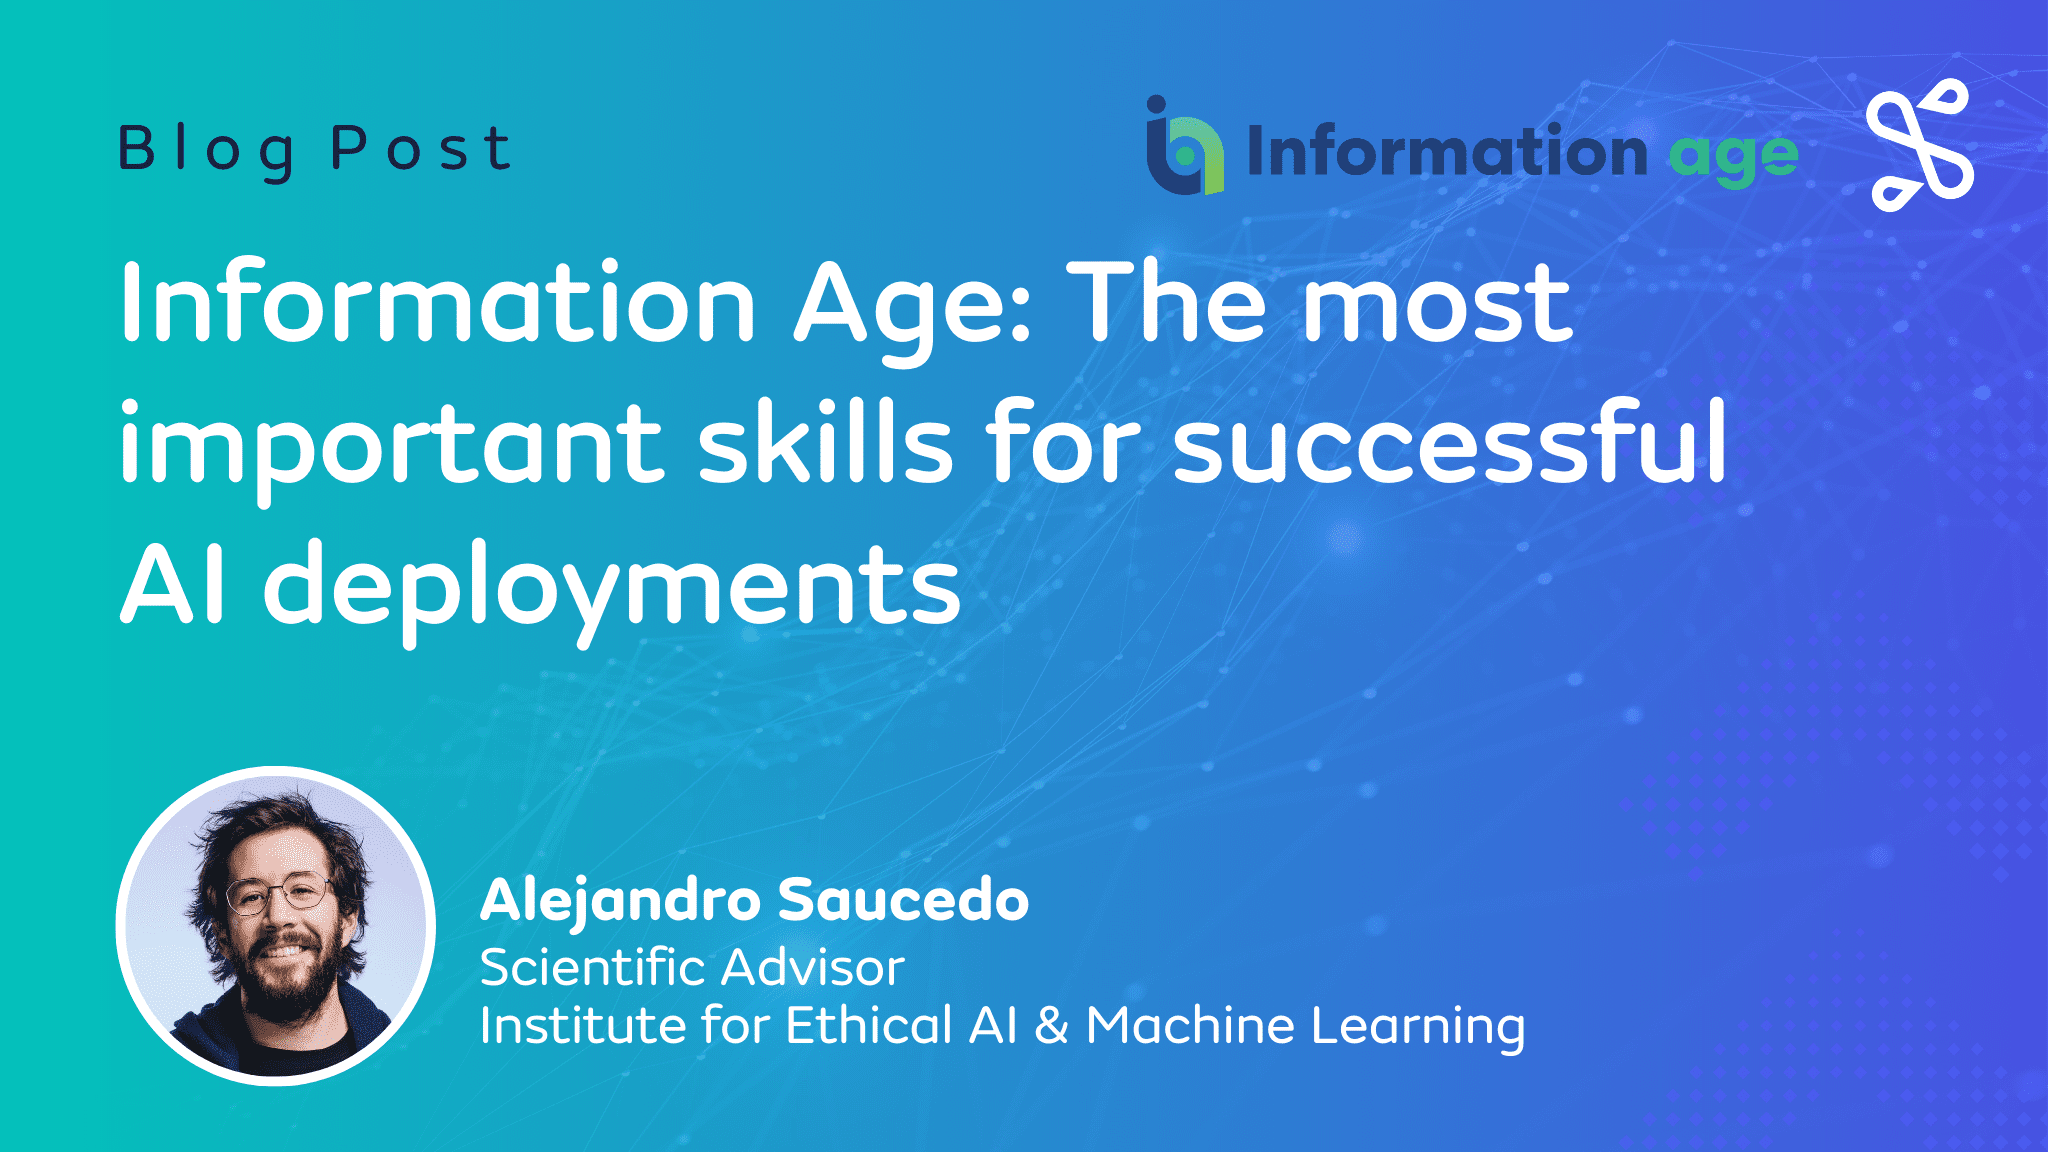 Information Age: The most important skills for successful AI deployments